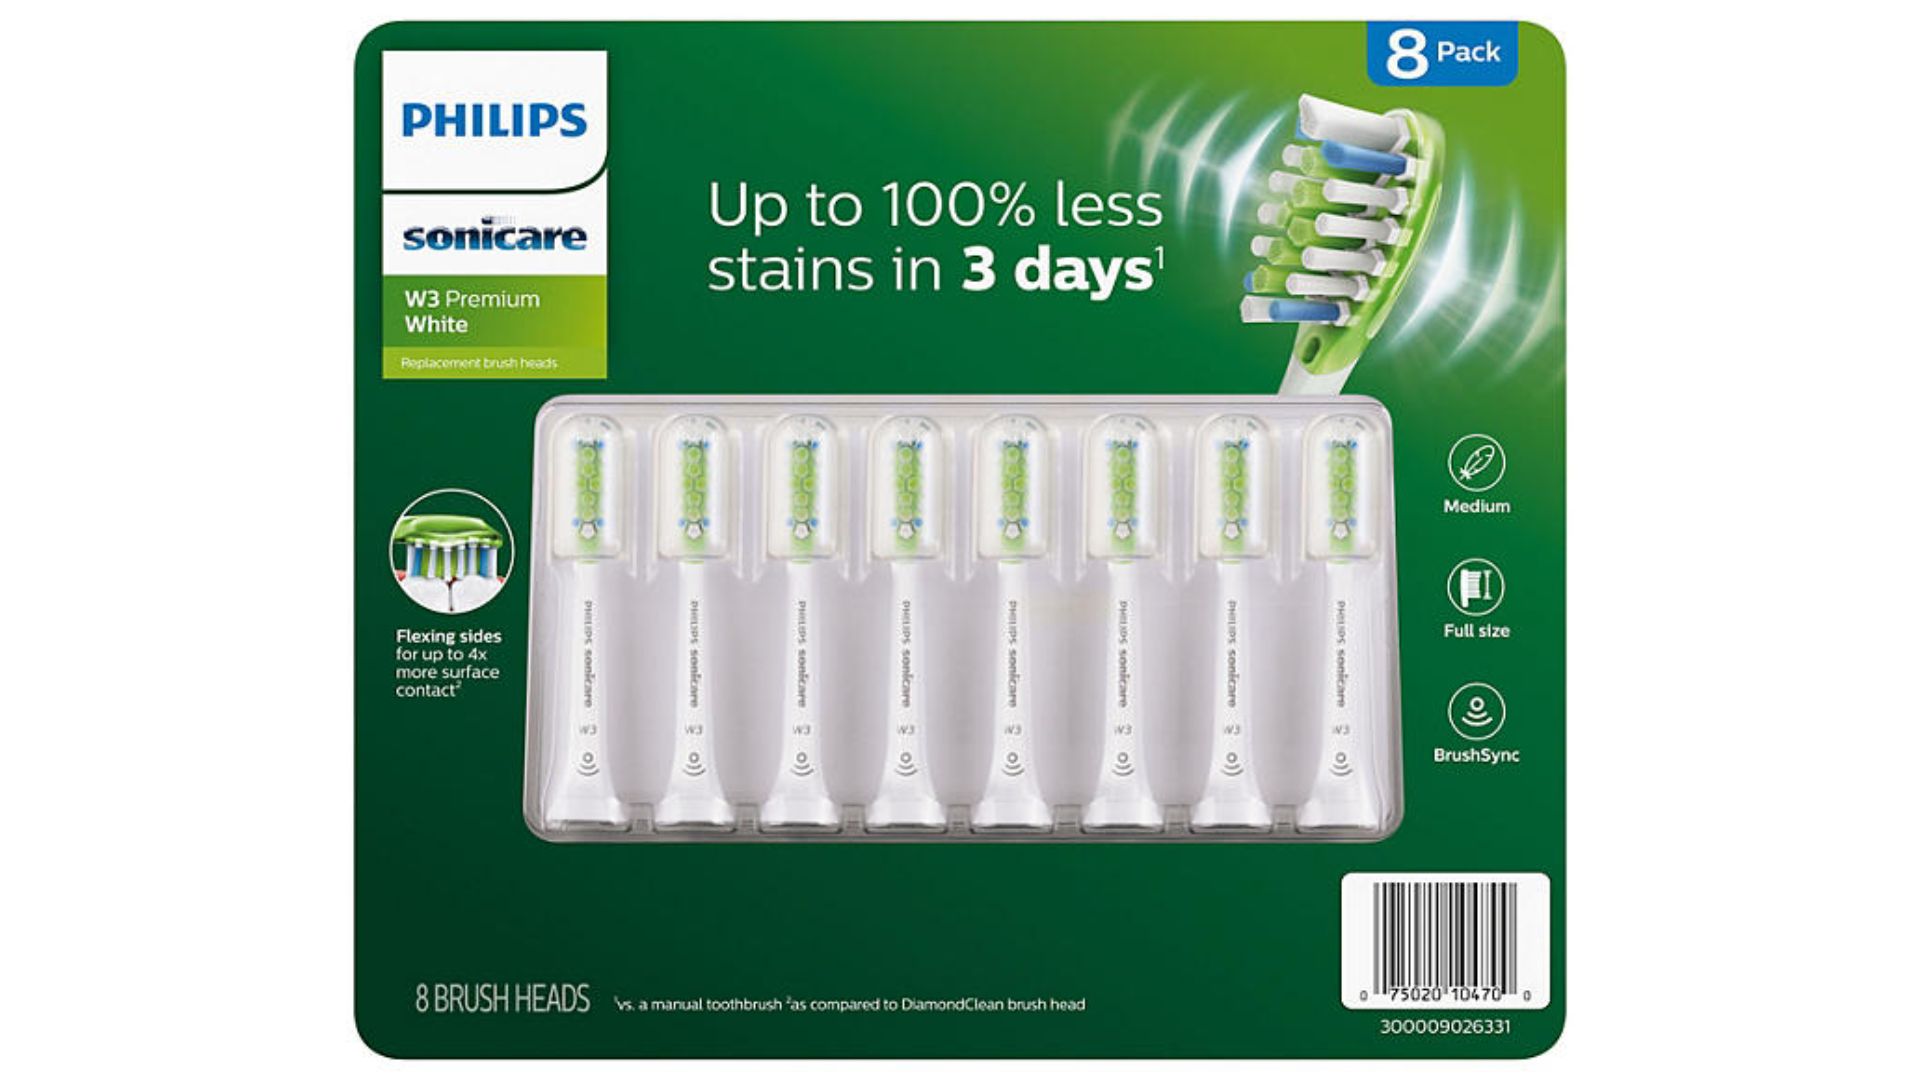 <p>If you have an electronic toothbrush, Ramhold said it's a good idea to change out the head as part of your spring cleaning.</p> <p>"Thankfully Sam's Club knows this is a trend for shoppers, as it's currently taking $10 off select toothbrush heads including Philips Sonicare W3, Oral-B FlossAction and Philips Sonicare Premium Whitening heads," she said</p> <p>She said each pack includes eight-to-10 heads, depending on the brand, with a limit of three per member.</p> <p>"Since these kinds of items can be pricey, it's worth stocking up on them now while they're on sale if you can," she said.</p> <p><strong>More: <a href="https://www.gobankingrates.com/saving-money/shopping/household-products-to-always-buy-in-bulk-at-costco/?utm_term=related_link_5&utm_campaign=1265761&utm_source=msn.com&utm_content=7&utm_medium=rss" rel="">7 Household Products To Always Buy in Bulk at Costco</a></strong></p>